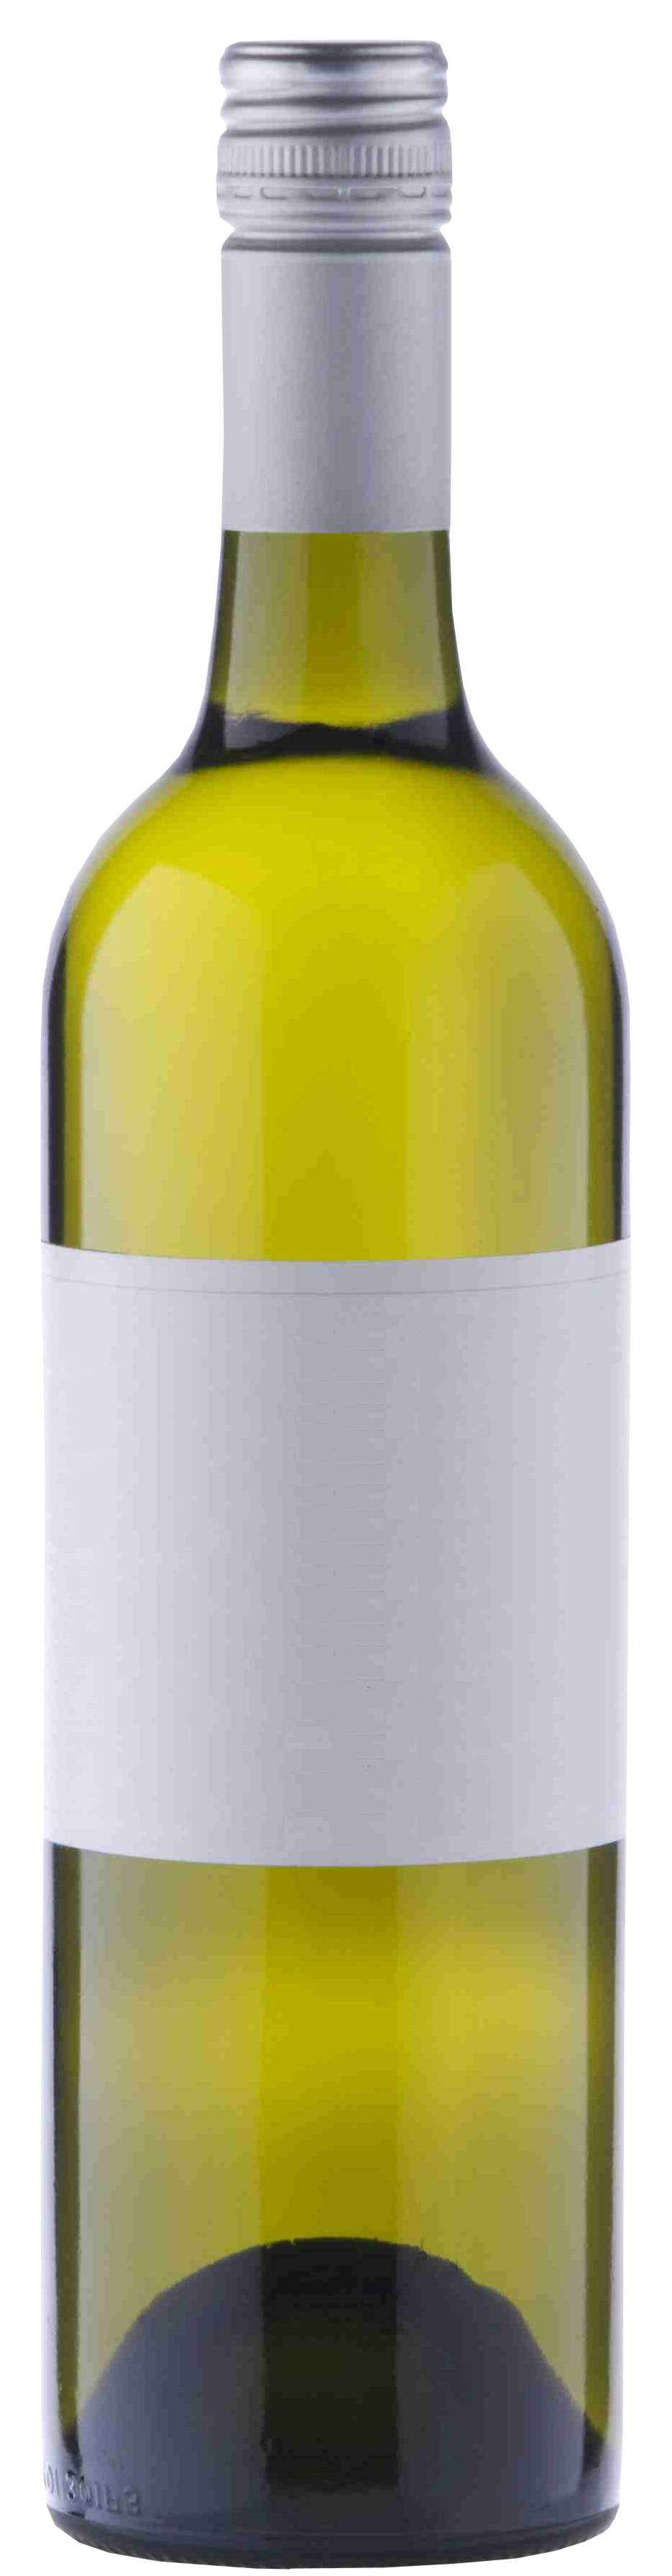 White wine bottle png. Images free download image